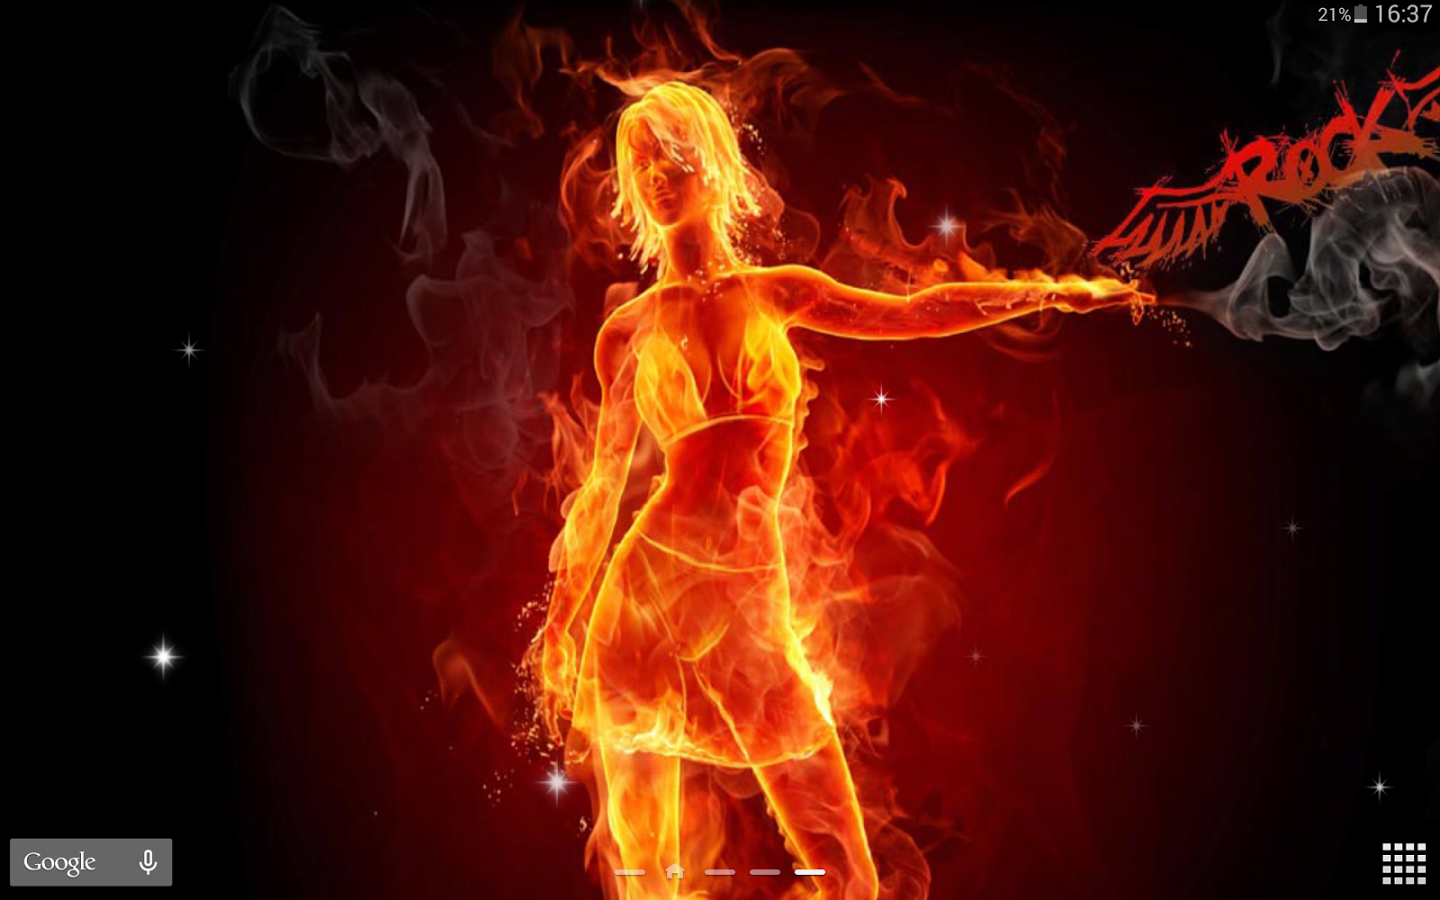 rocking wallpapers hd,heat,flame,fire,font,muscle